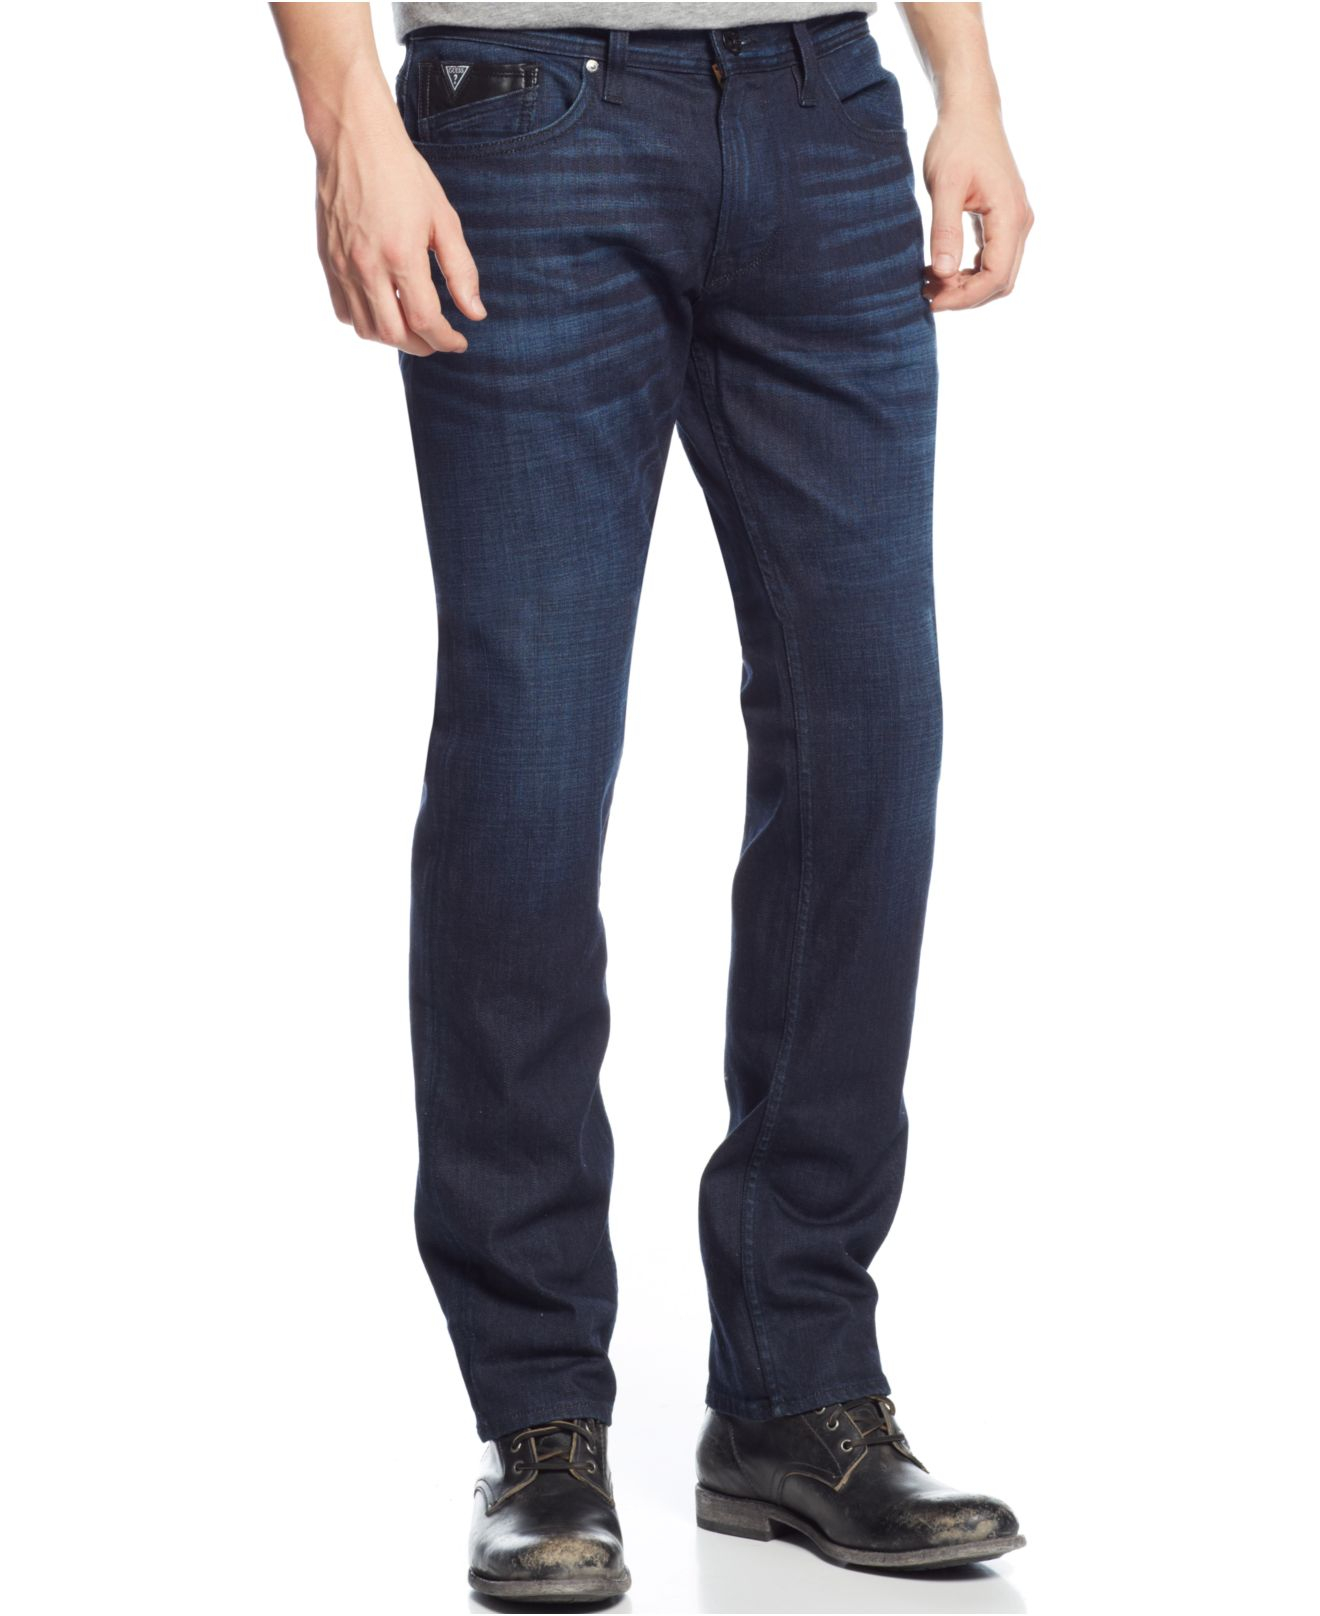 Lyst - Guess Slim Straight Faux-Leather-Pocket Jeans in Blue for Men